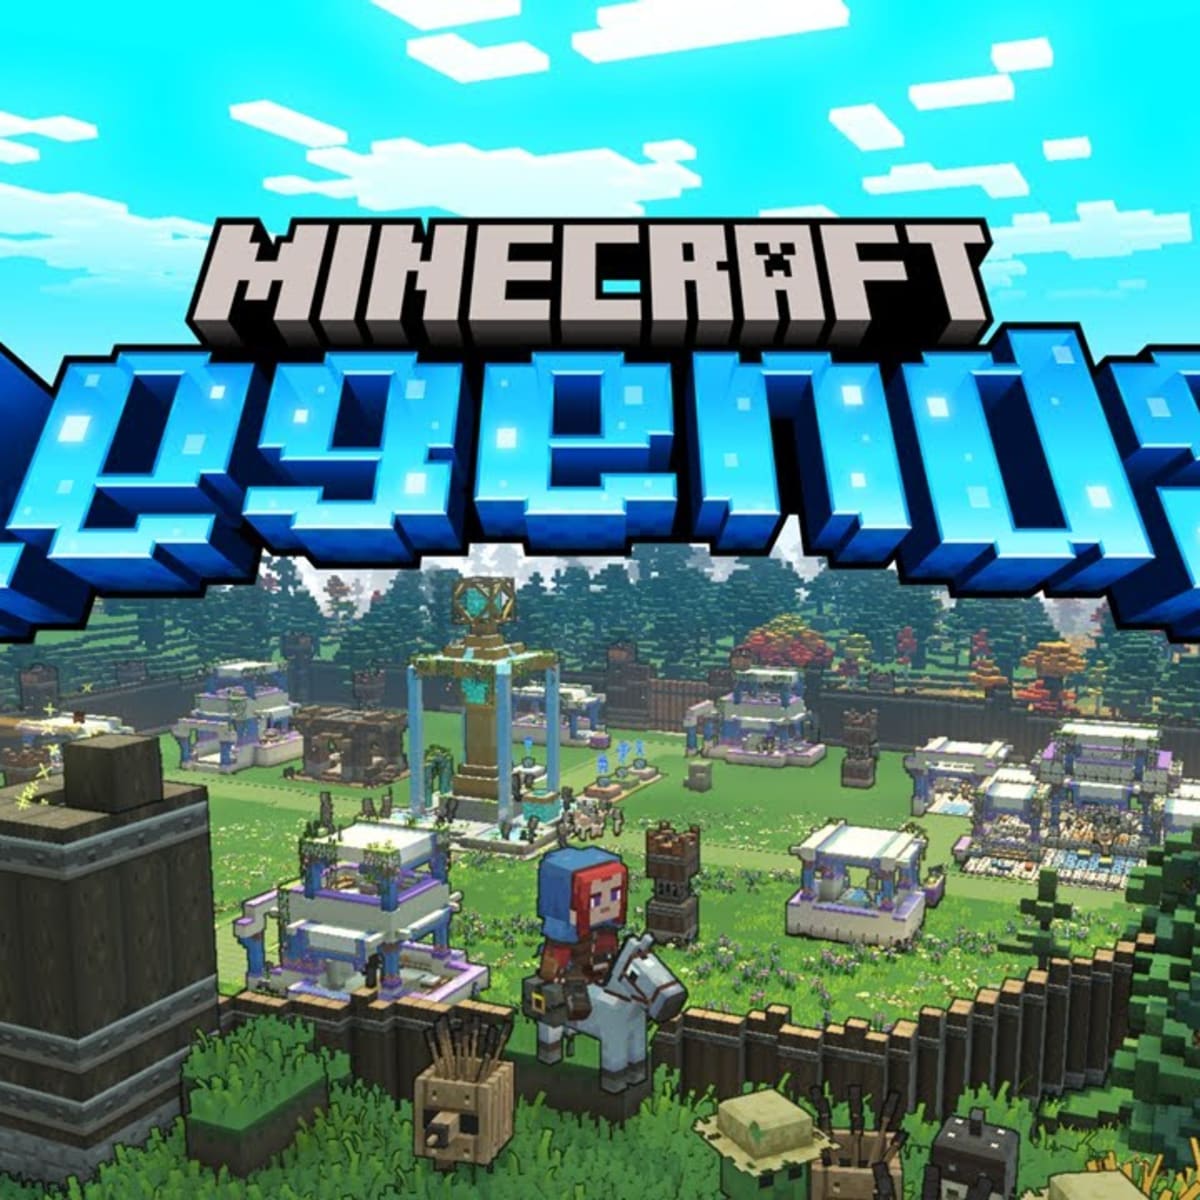 Minecraft Legends Update 1.06 Mines Out for Fixes This June 13